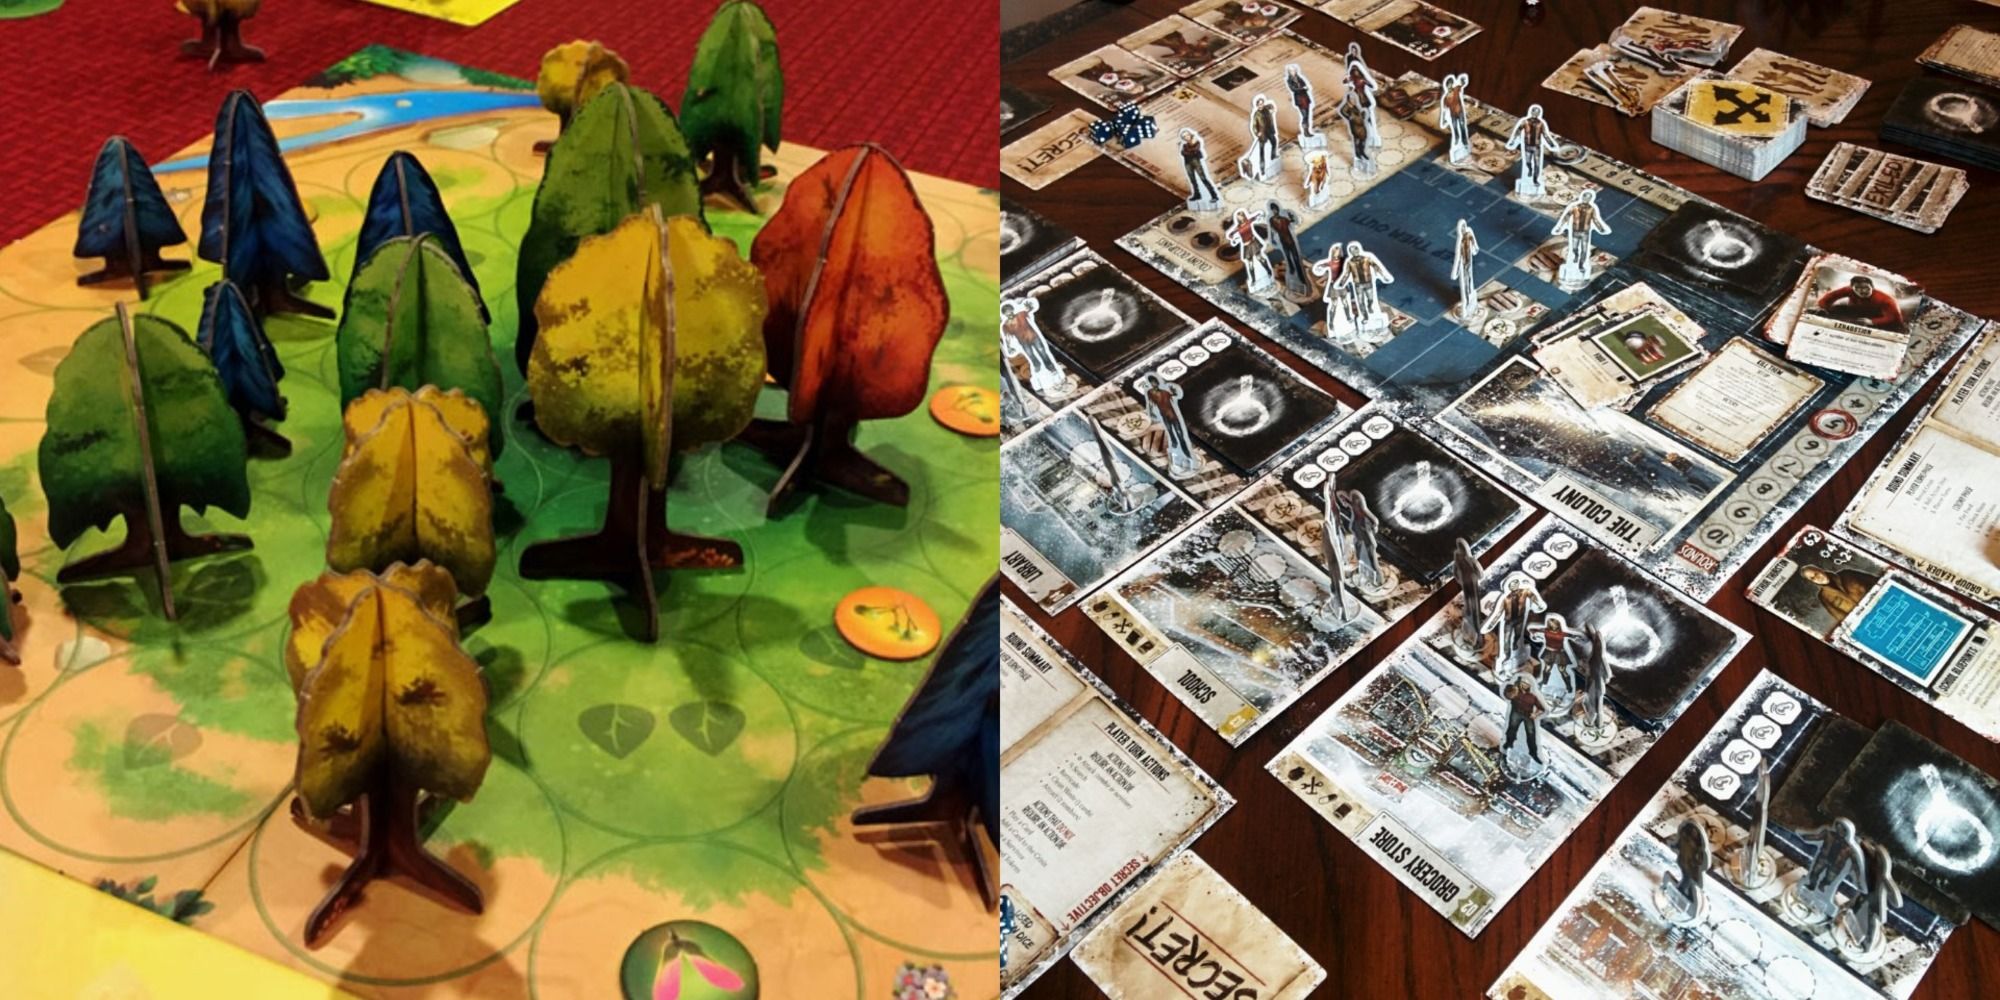 Photosynthesis and Dead of Winter board games